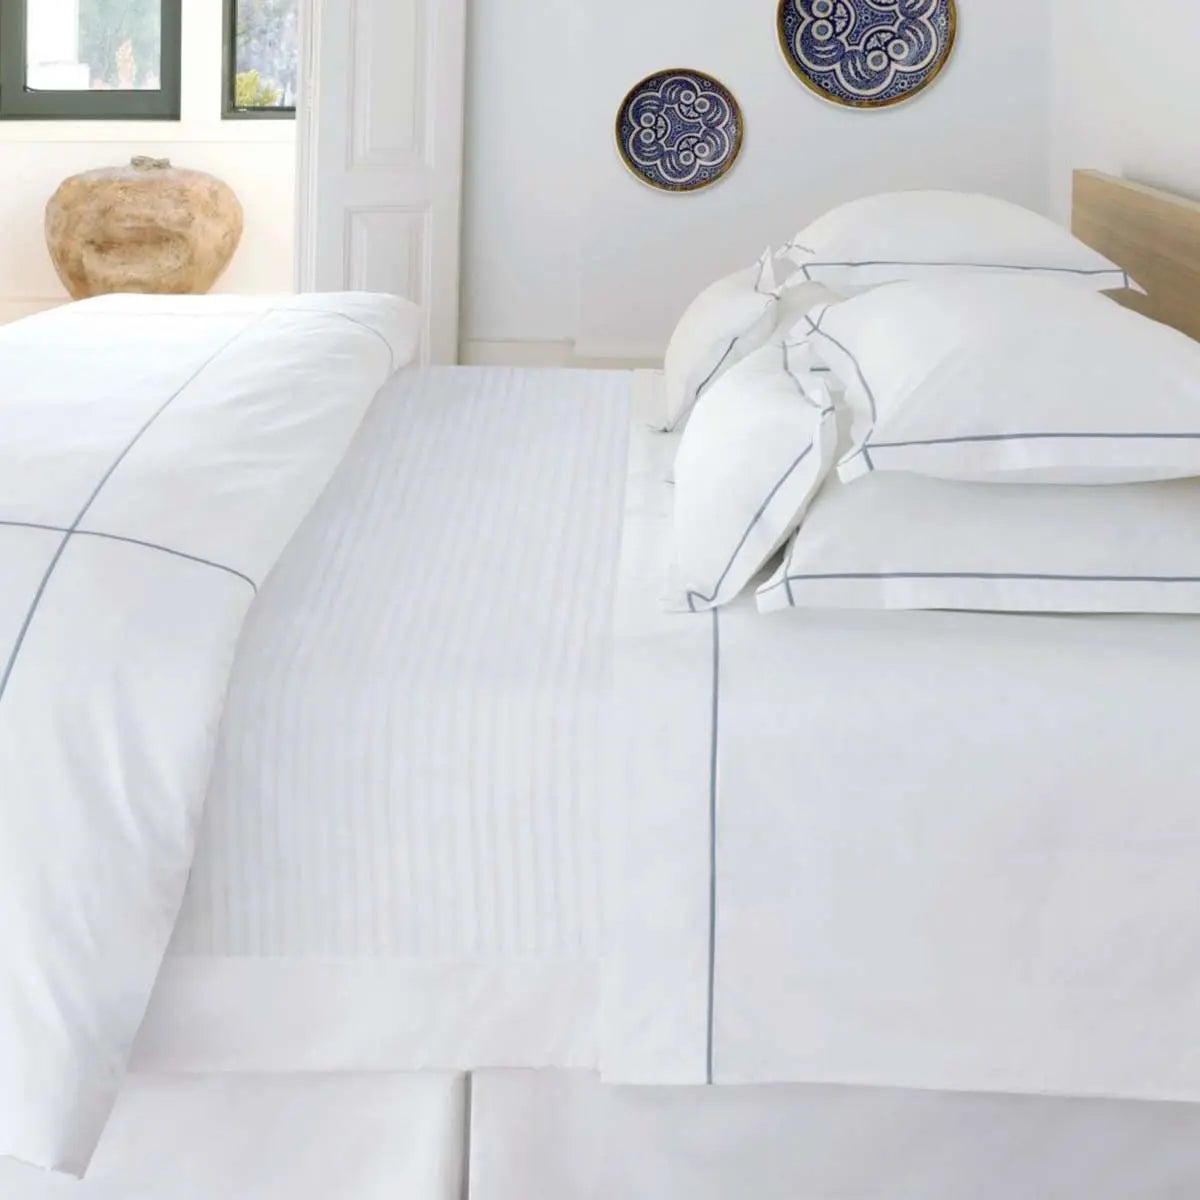 Bovi Classic Hotel White/Blue Bedding Collection in a room